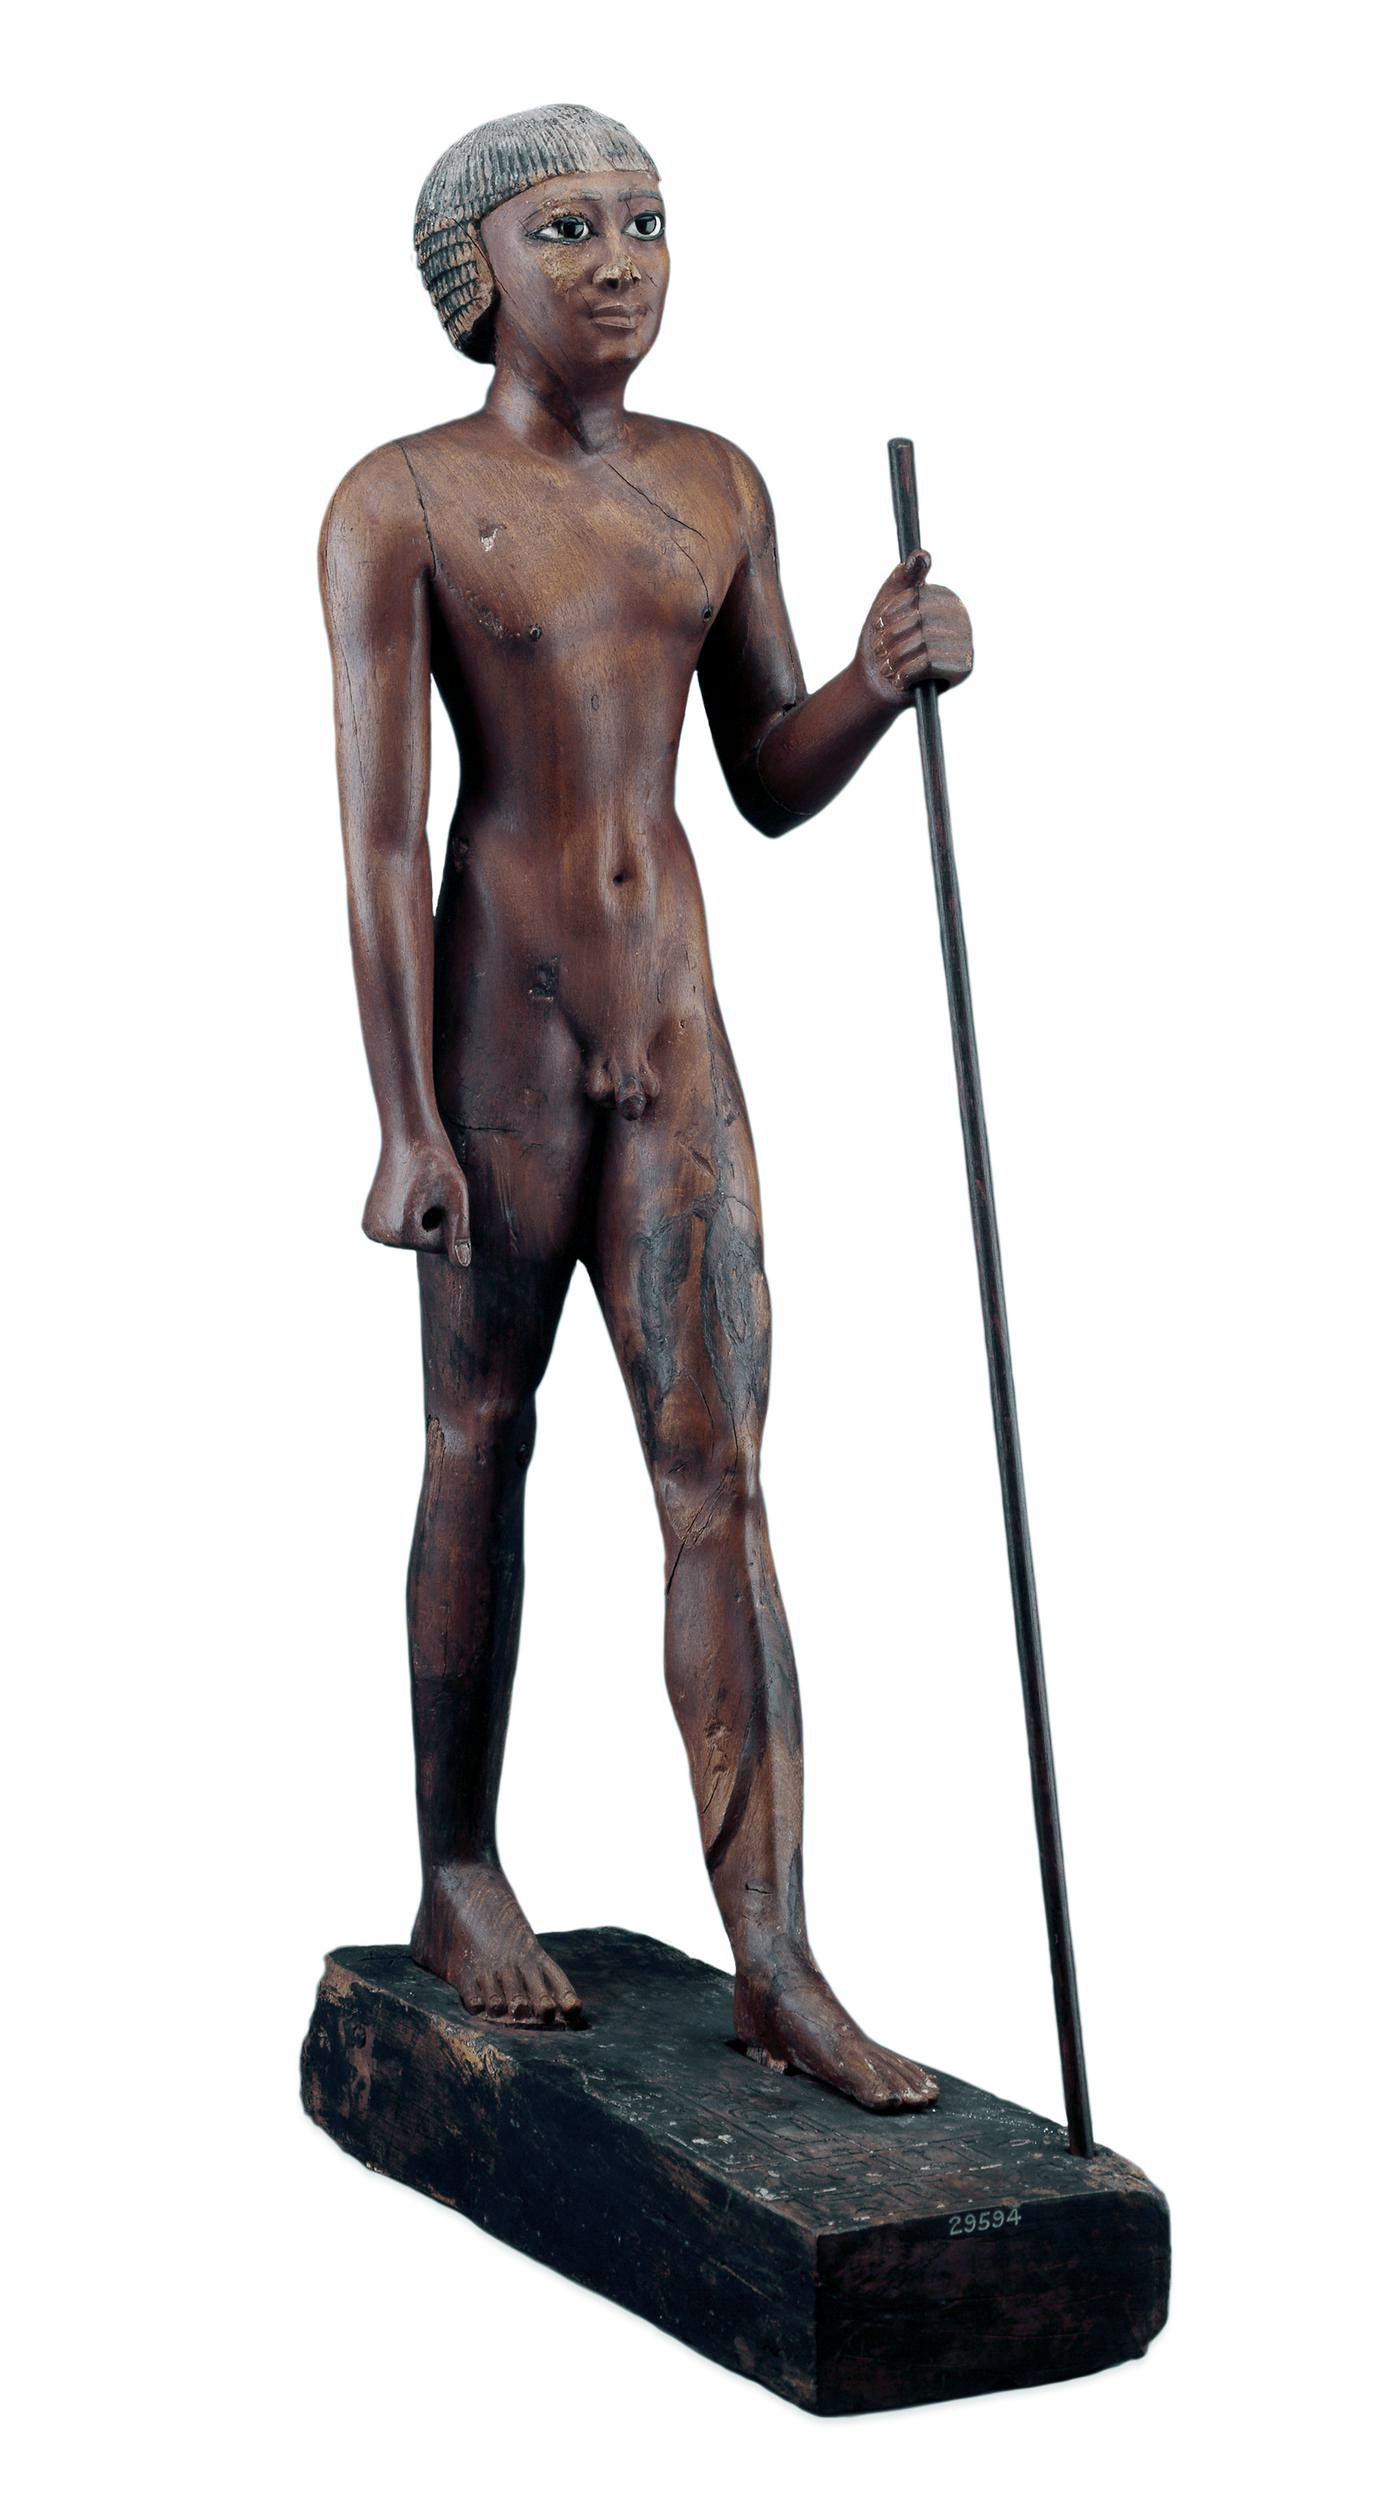 Nude figure of the Seal Bearer Tjetji, 2321BC-2184BC (6th Dynasty), from Akhmim, Upper Egypt, wood; obsidian; limestone; copper, 75 cm high (© Trustees of the British Museum)